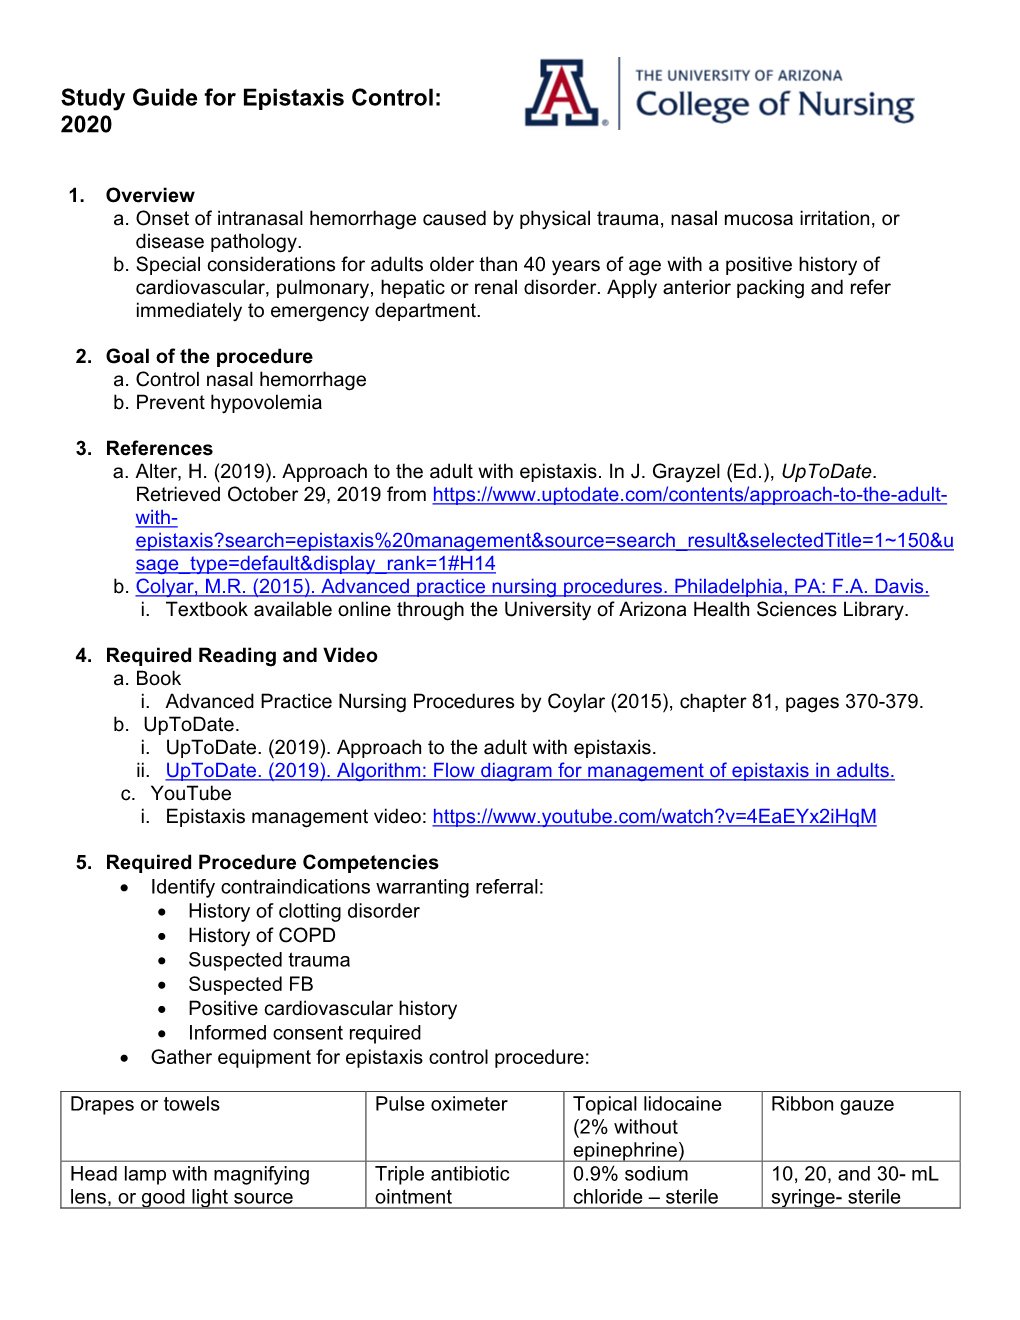 Study Guide for Epistaxis Control: 2020